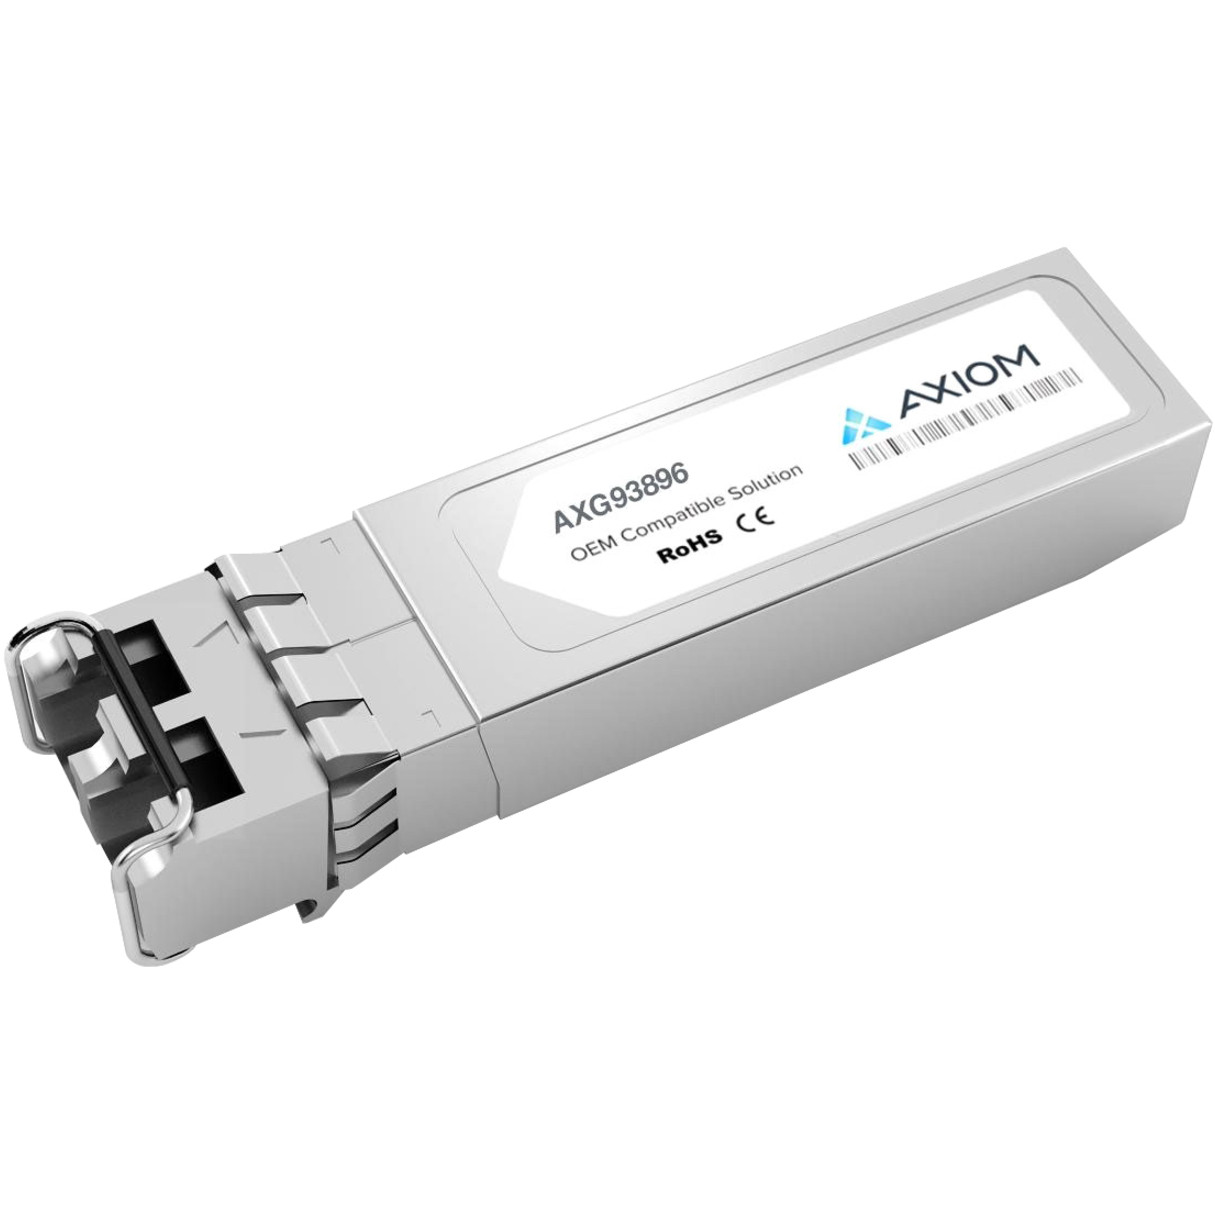 Axiom Memory Solutions 10GBASE-LR SFP+ Transceiver for NETSCOUT321-1487TAA CompliantFor Optical Network, Data Networking1 x 10GBase-LR NetworkOpt… AXG93896